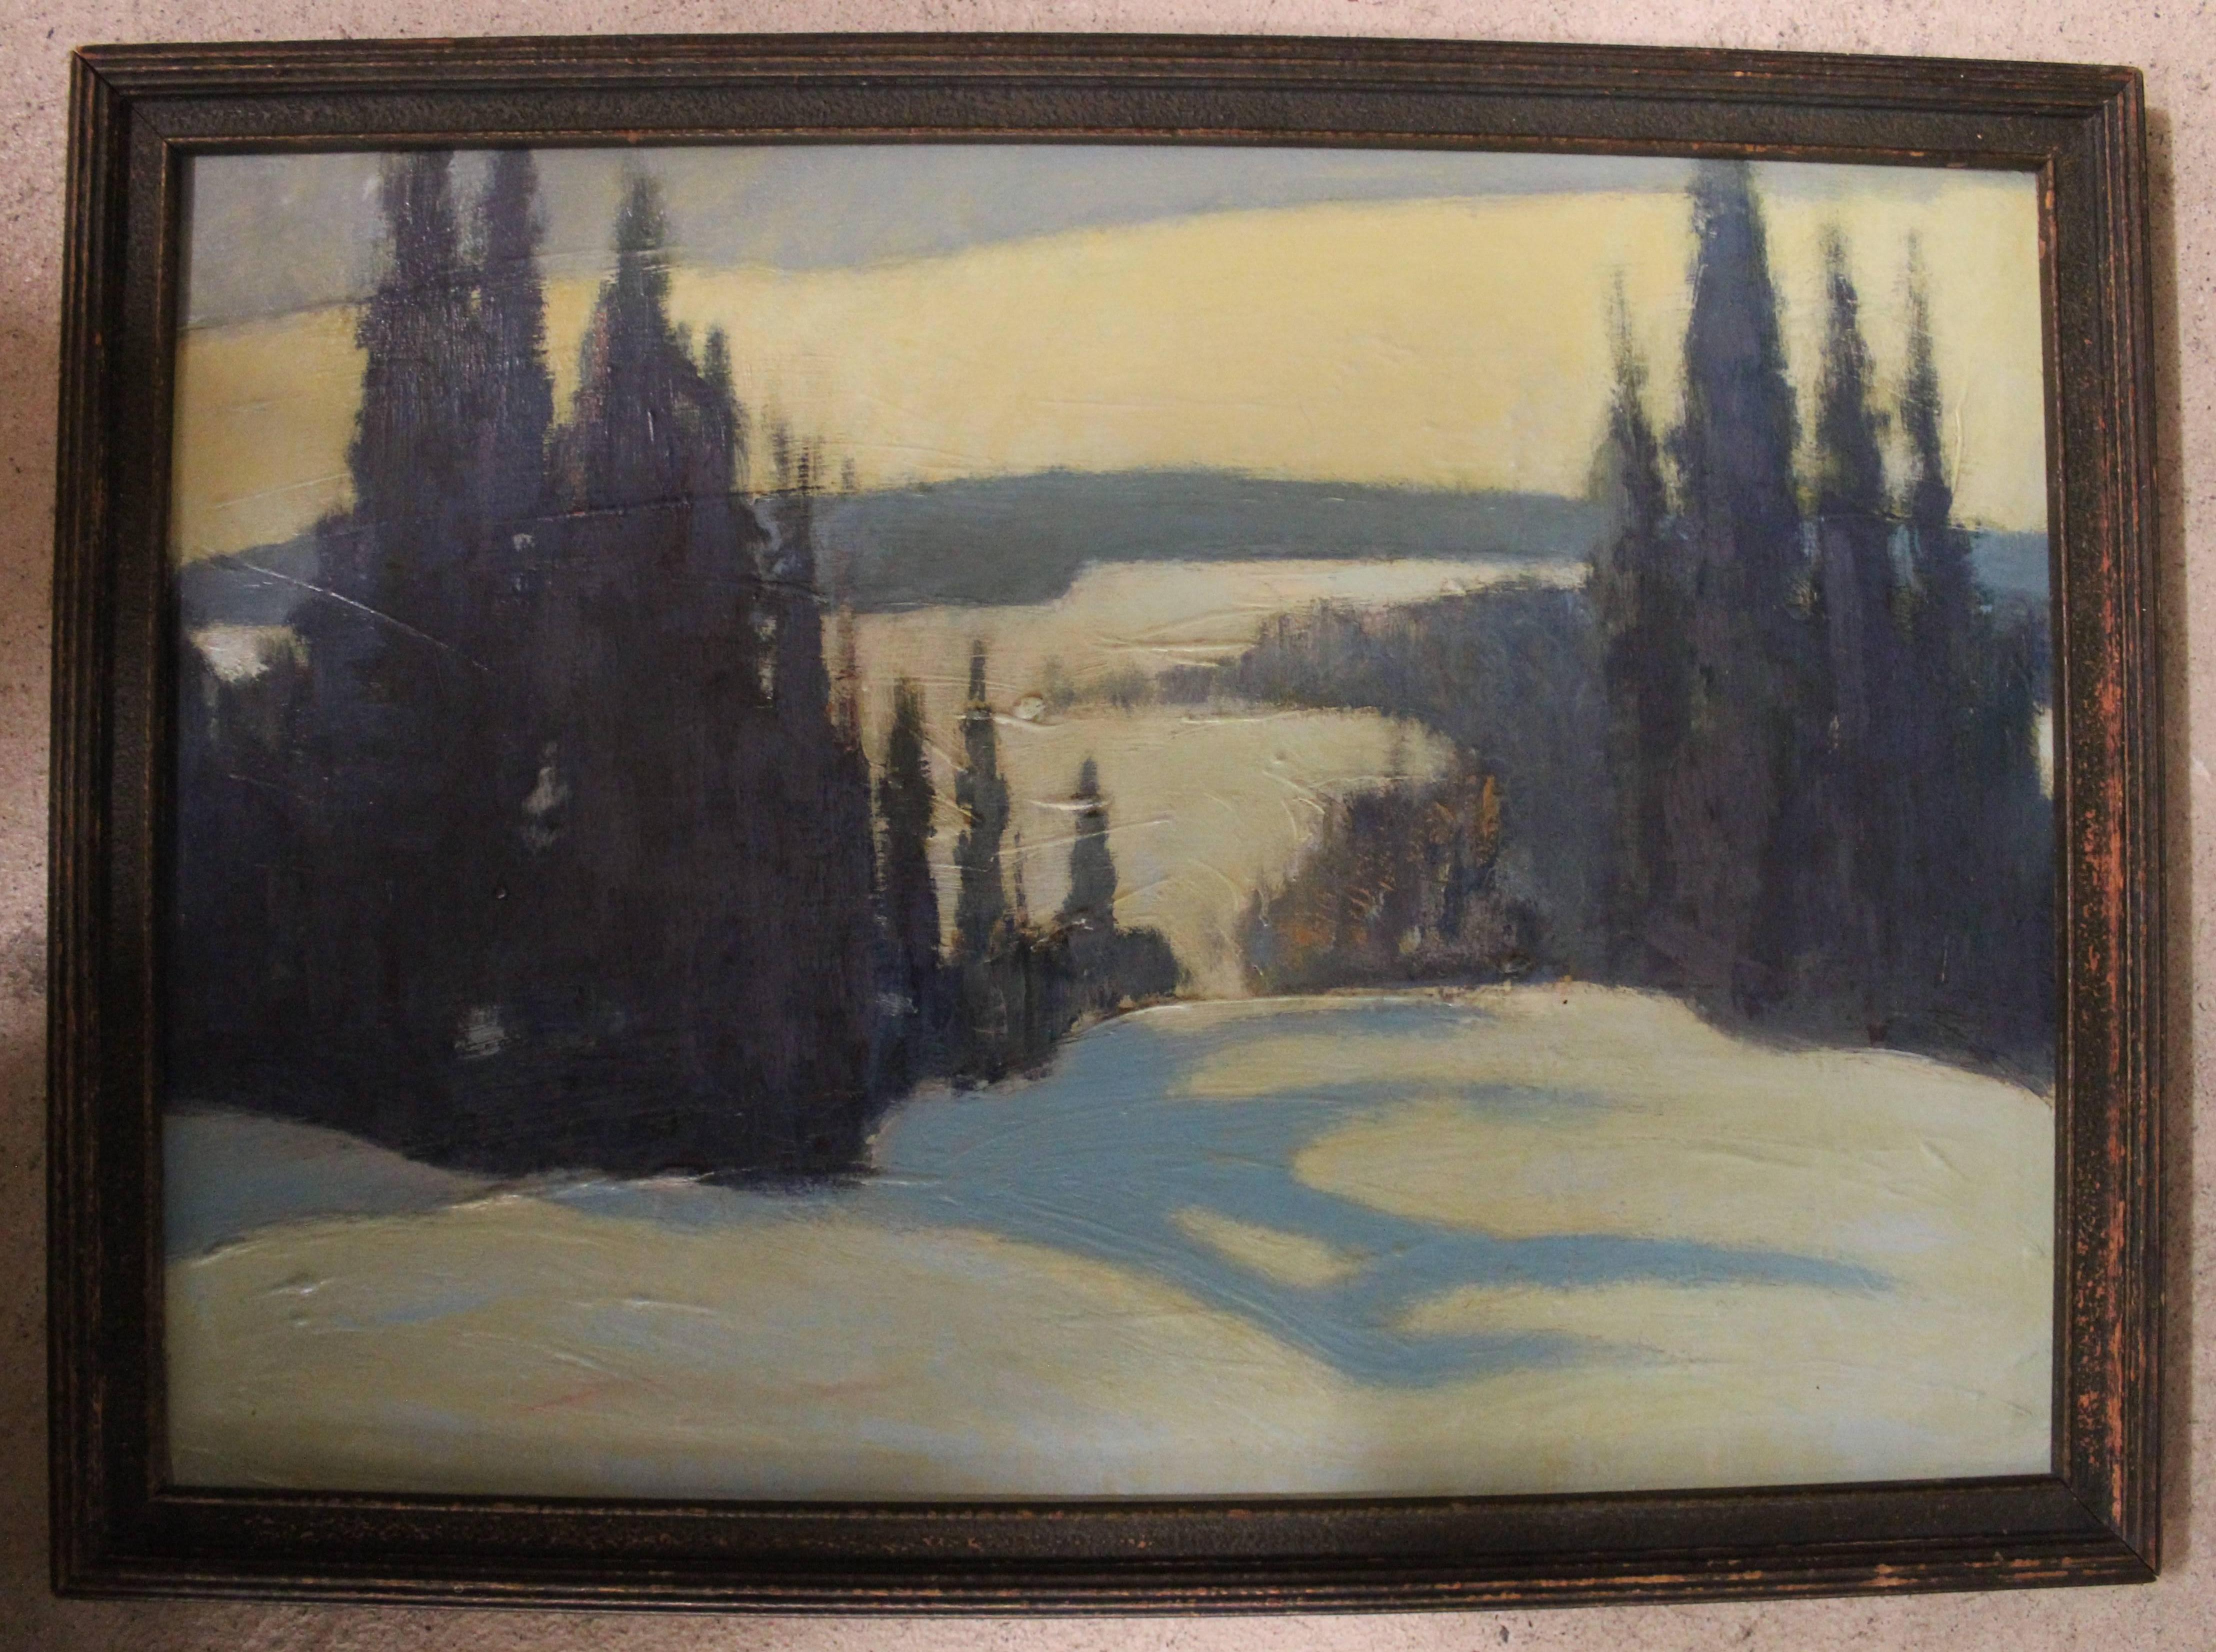 Hennessey, Frank Charles Rca, Frsa, Osa
Medium: Oil
Canadian (1894-1941)
Signed on verso
Size without frame: 10 high x 14 wide
Size with frame: 11 high x 15 wide

Frank was born in Ottawa in 1893 and studied at Albion College, Michigan. He travelled